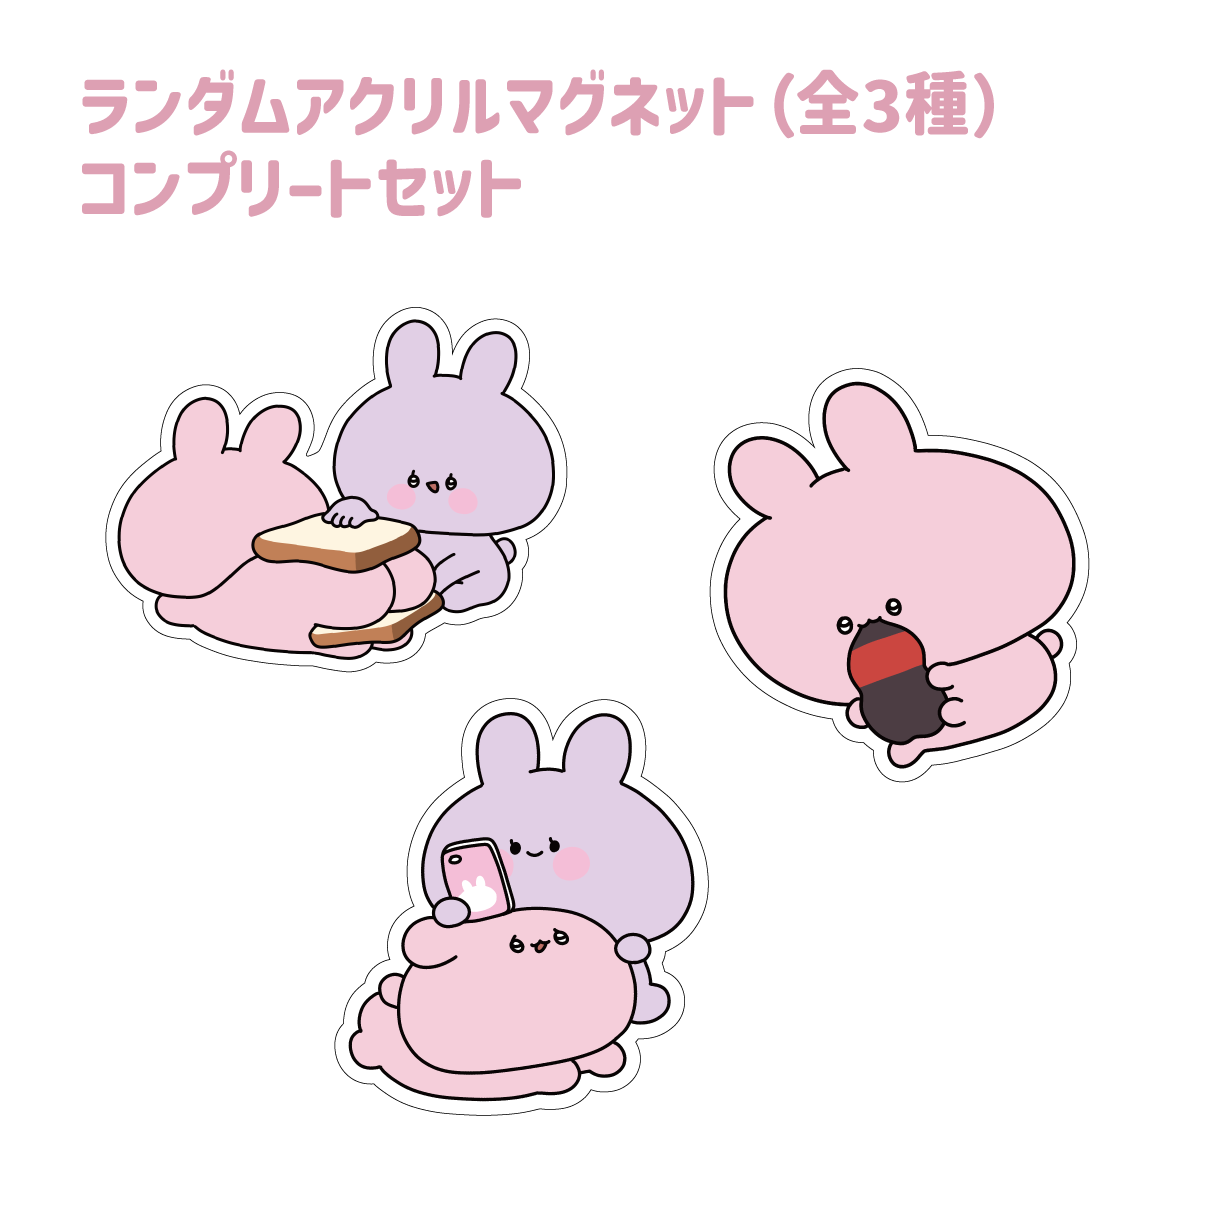 [Asamimi-chan] Random acrylic magnet complete set (all 3 types) (Asamimi-chan popular scene Yoseatsume series) [Shipped in mid-February]